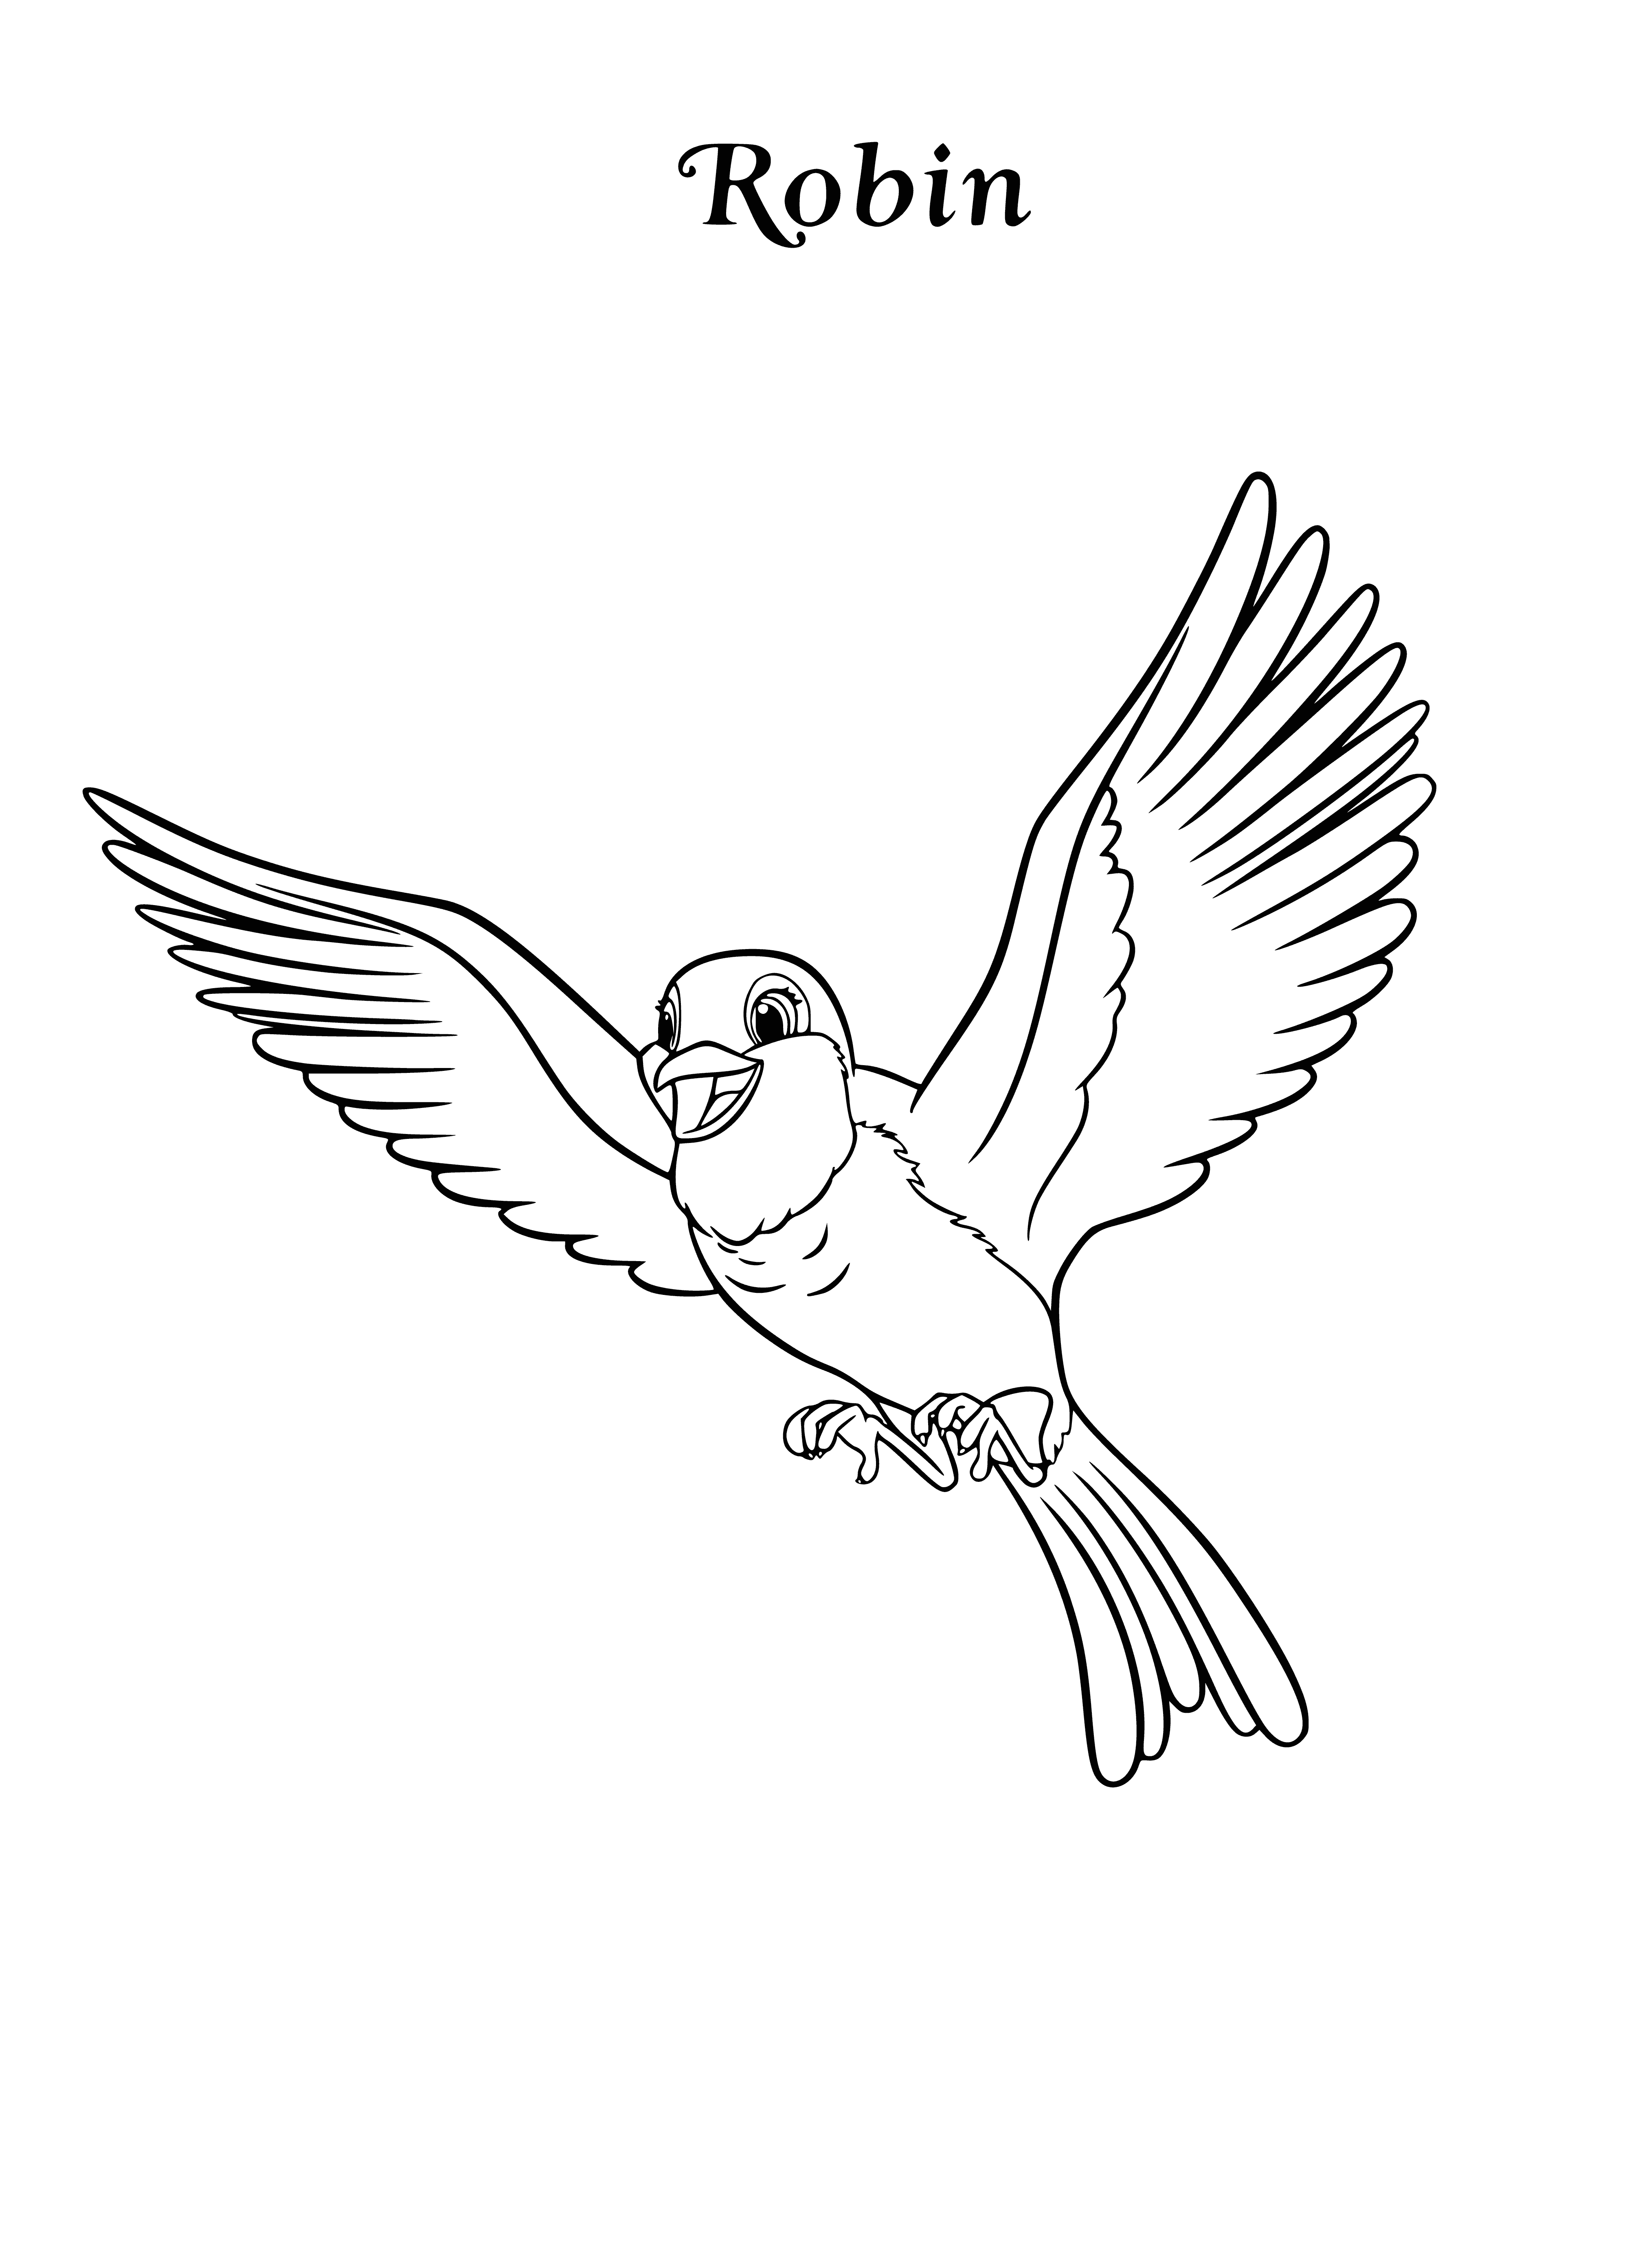 Robin the bird coloring page